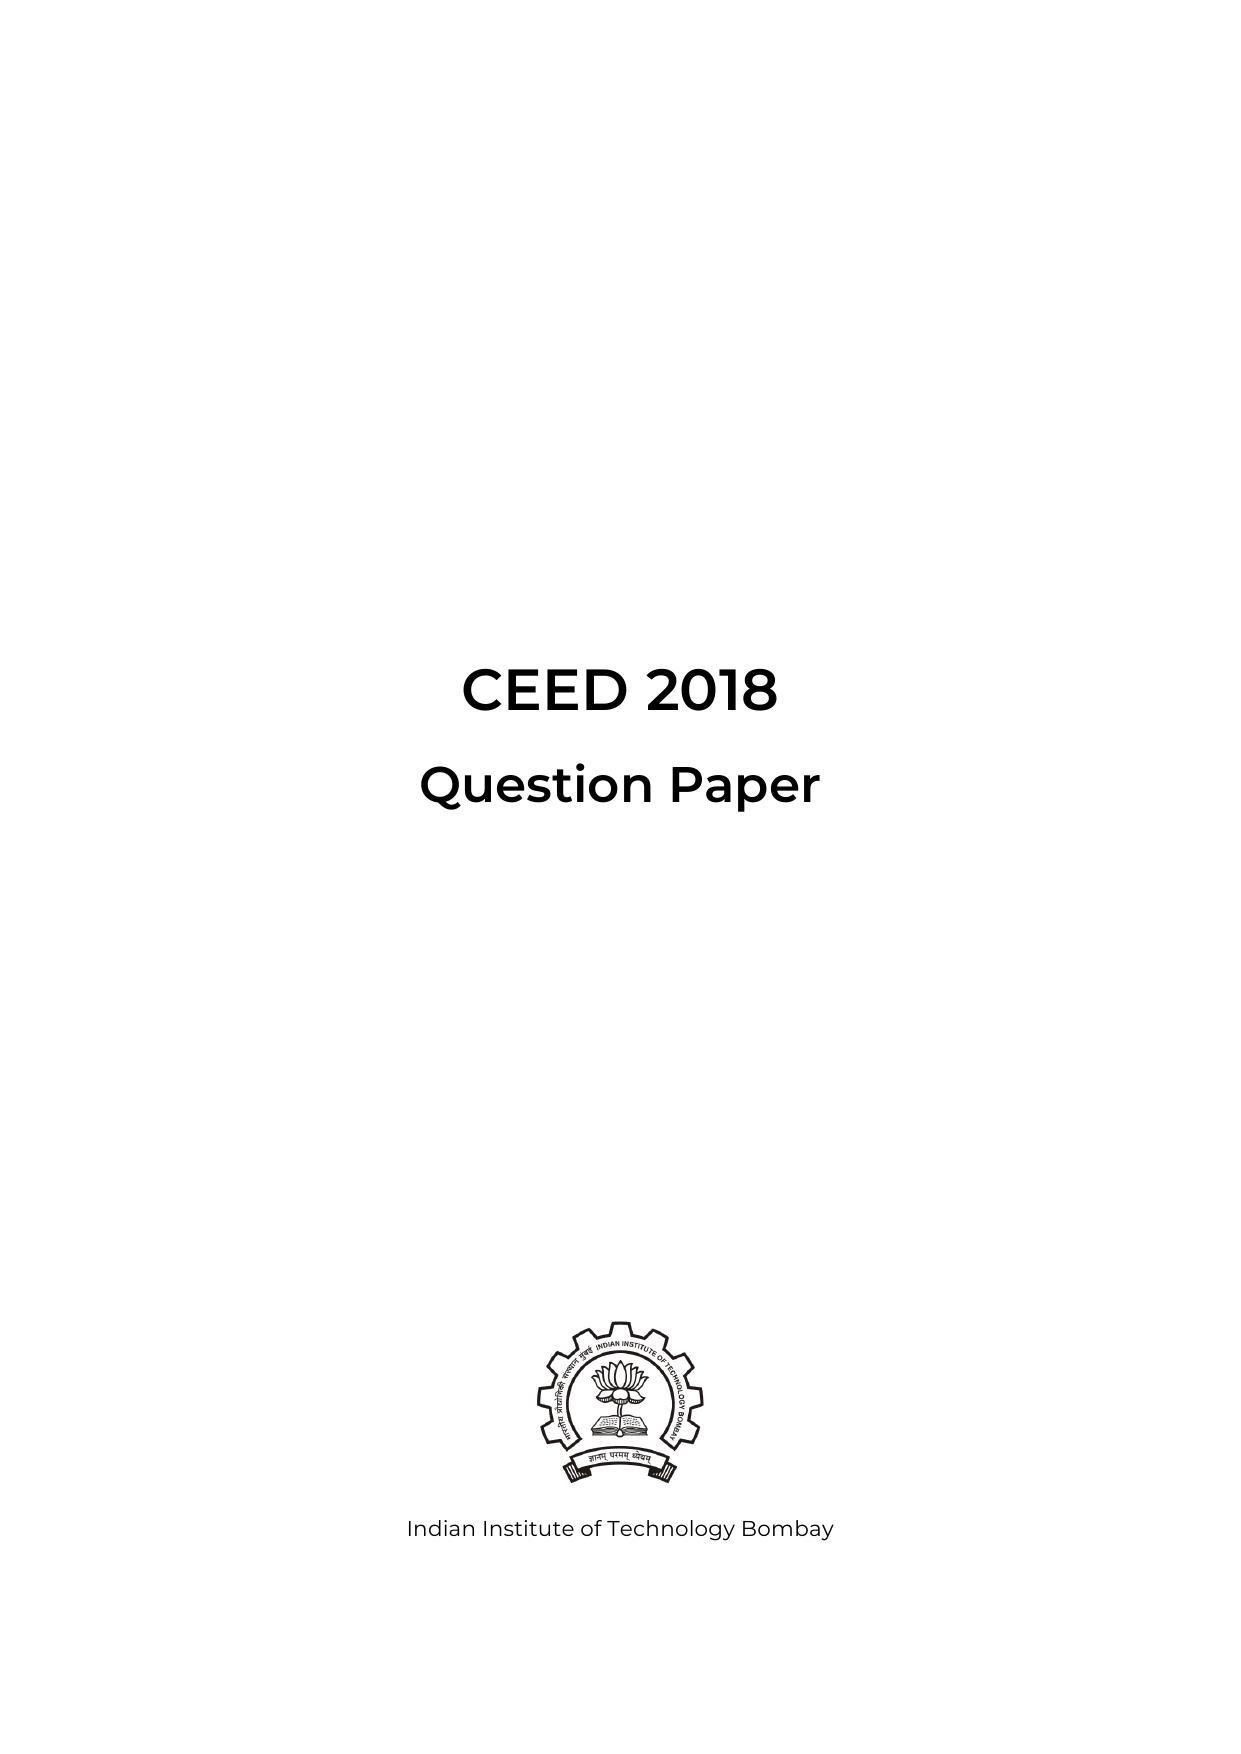 CEED 2018 Question Paper - Page 1